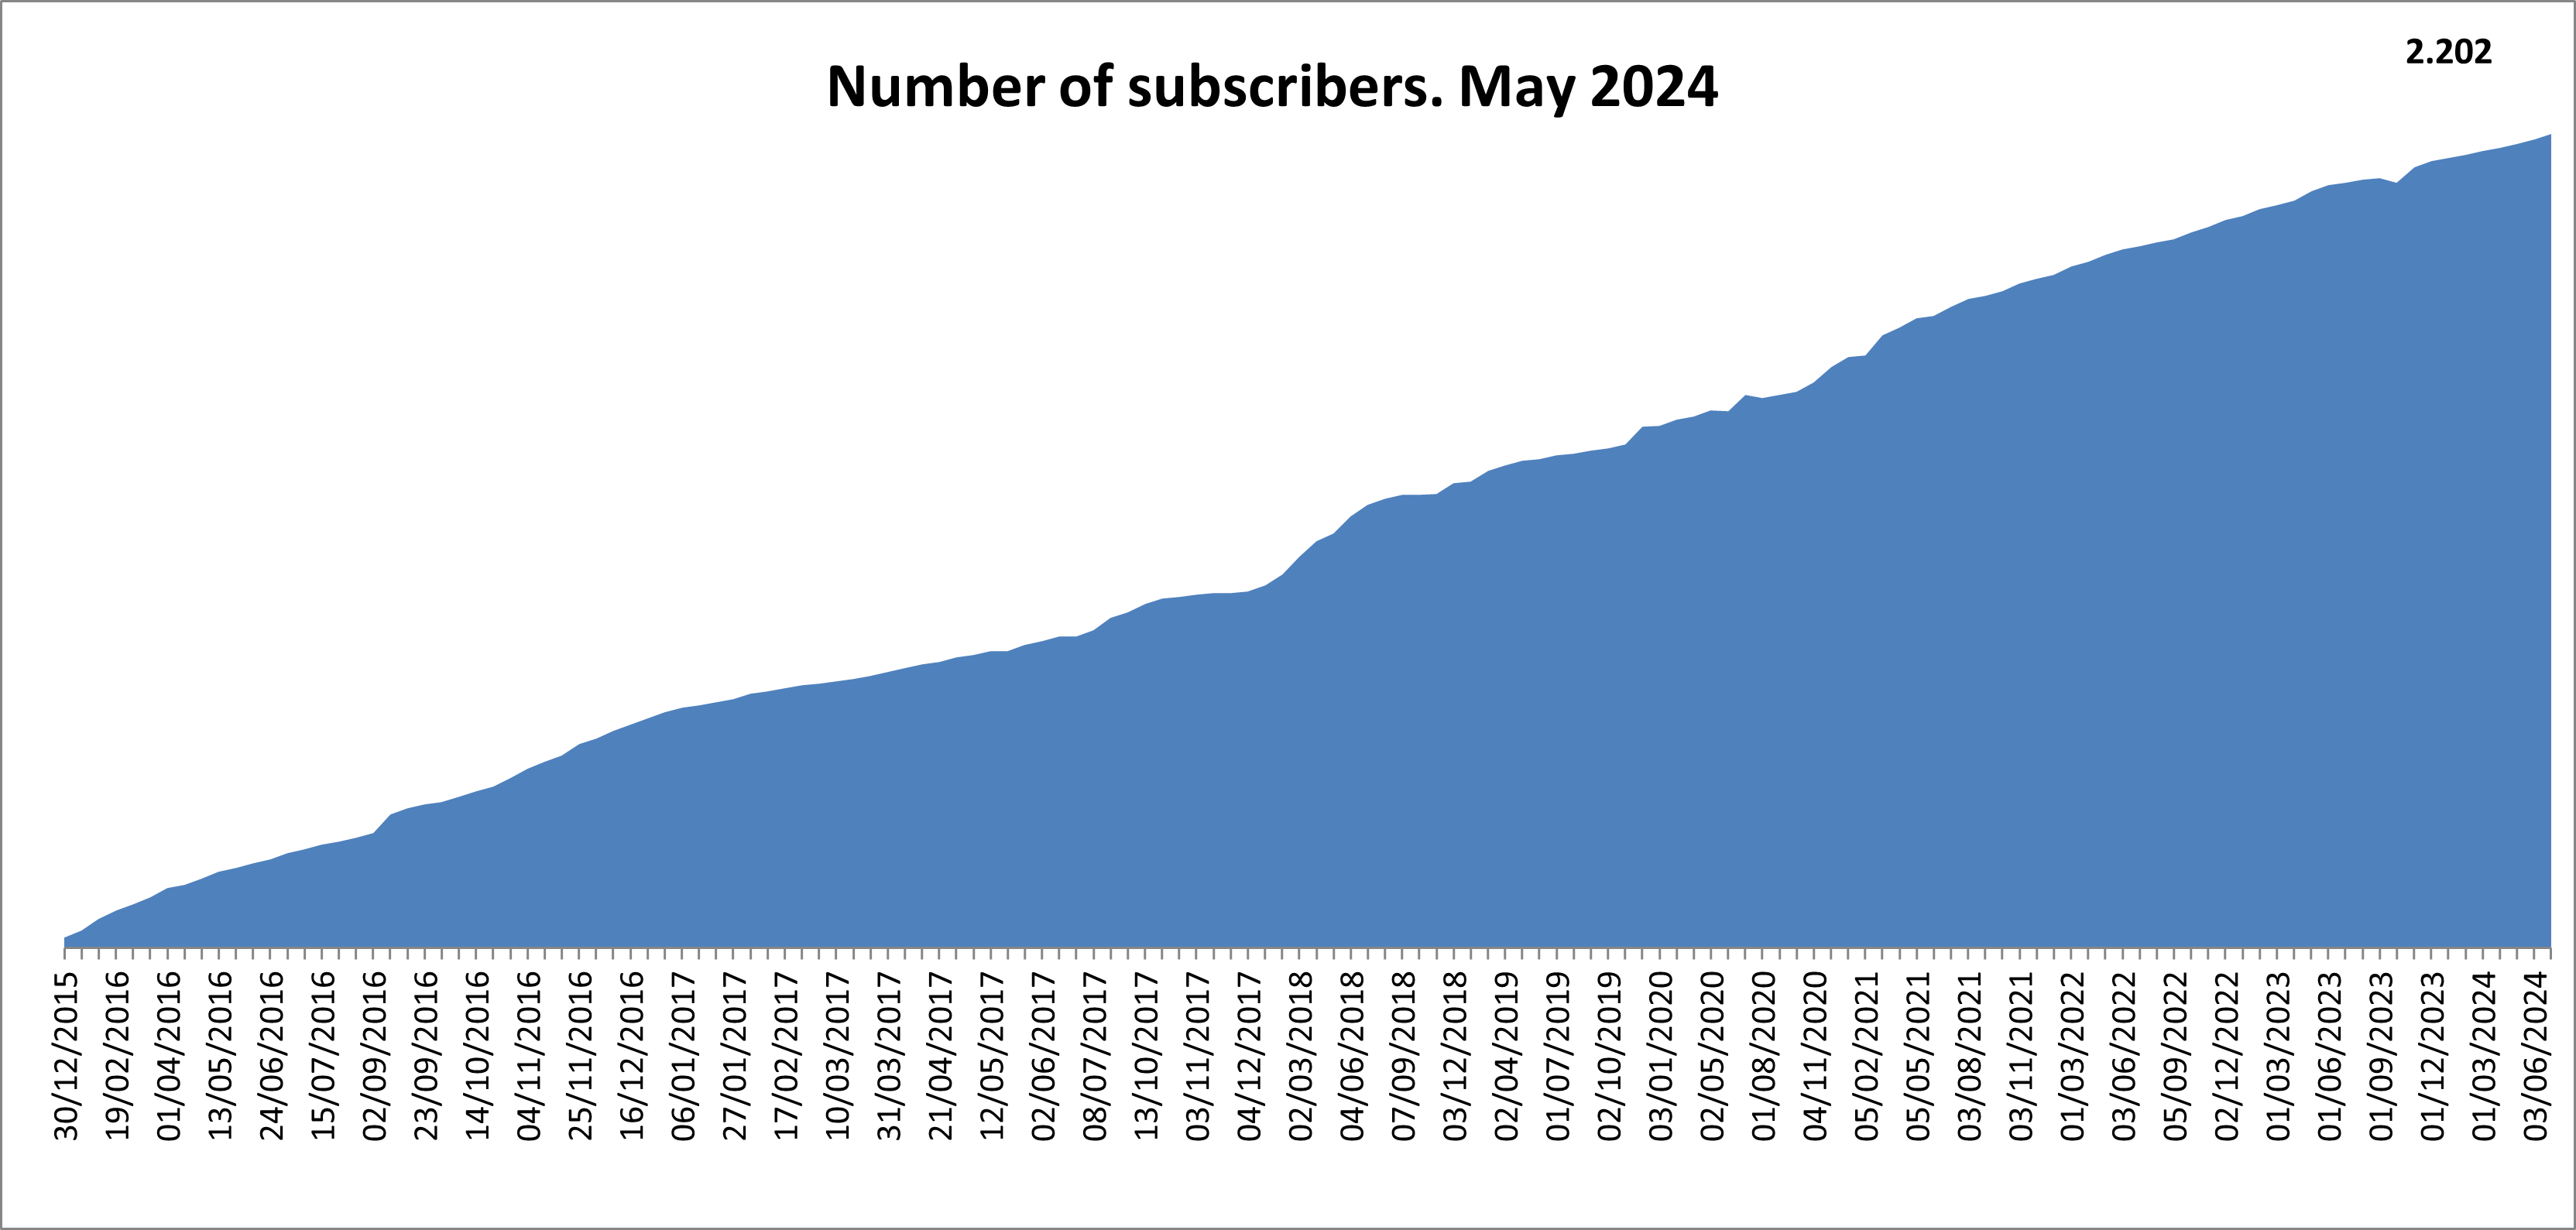 Number of subscribers 2008. January 2023